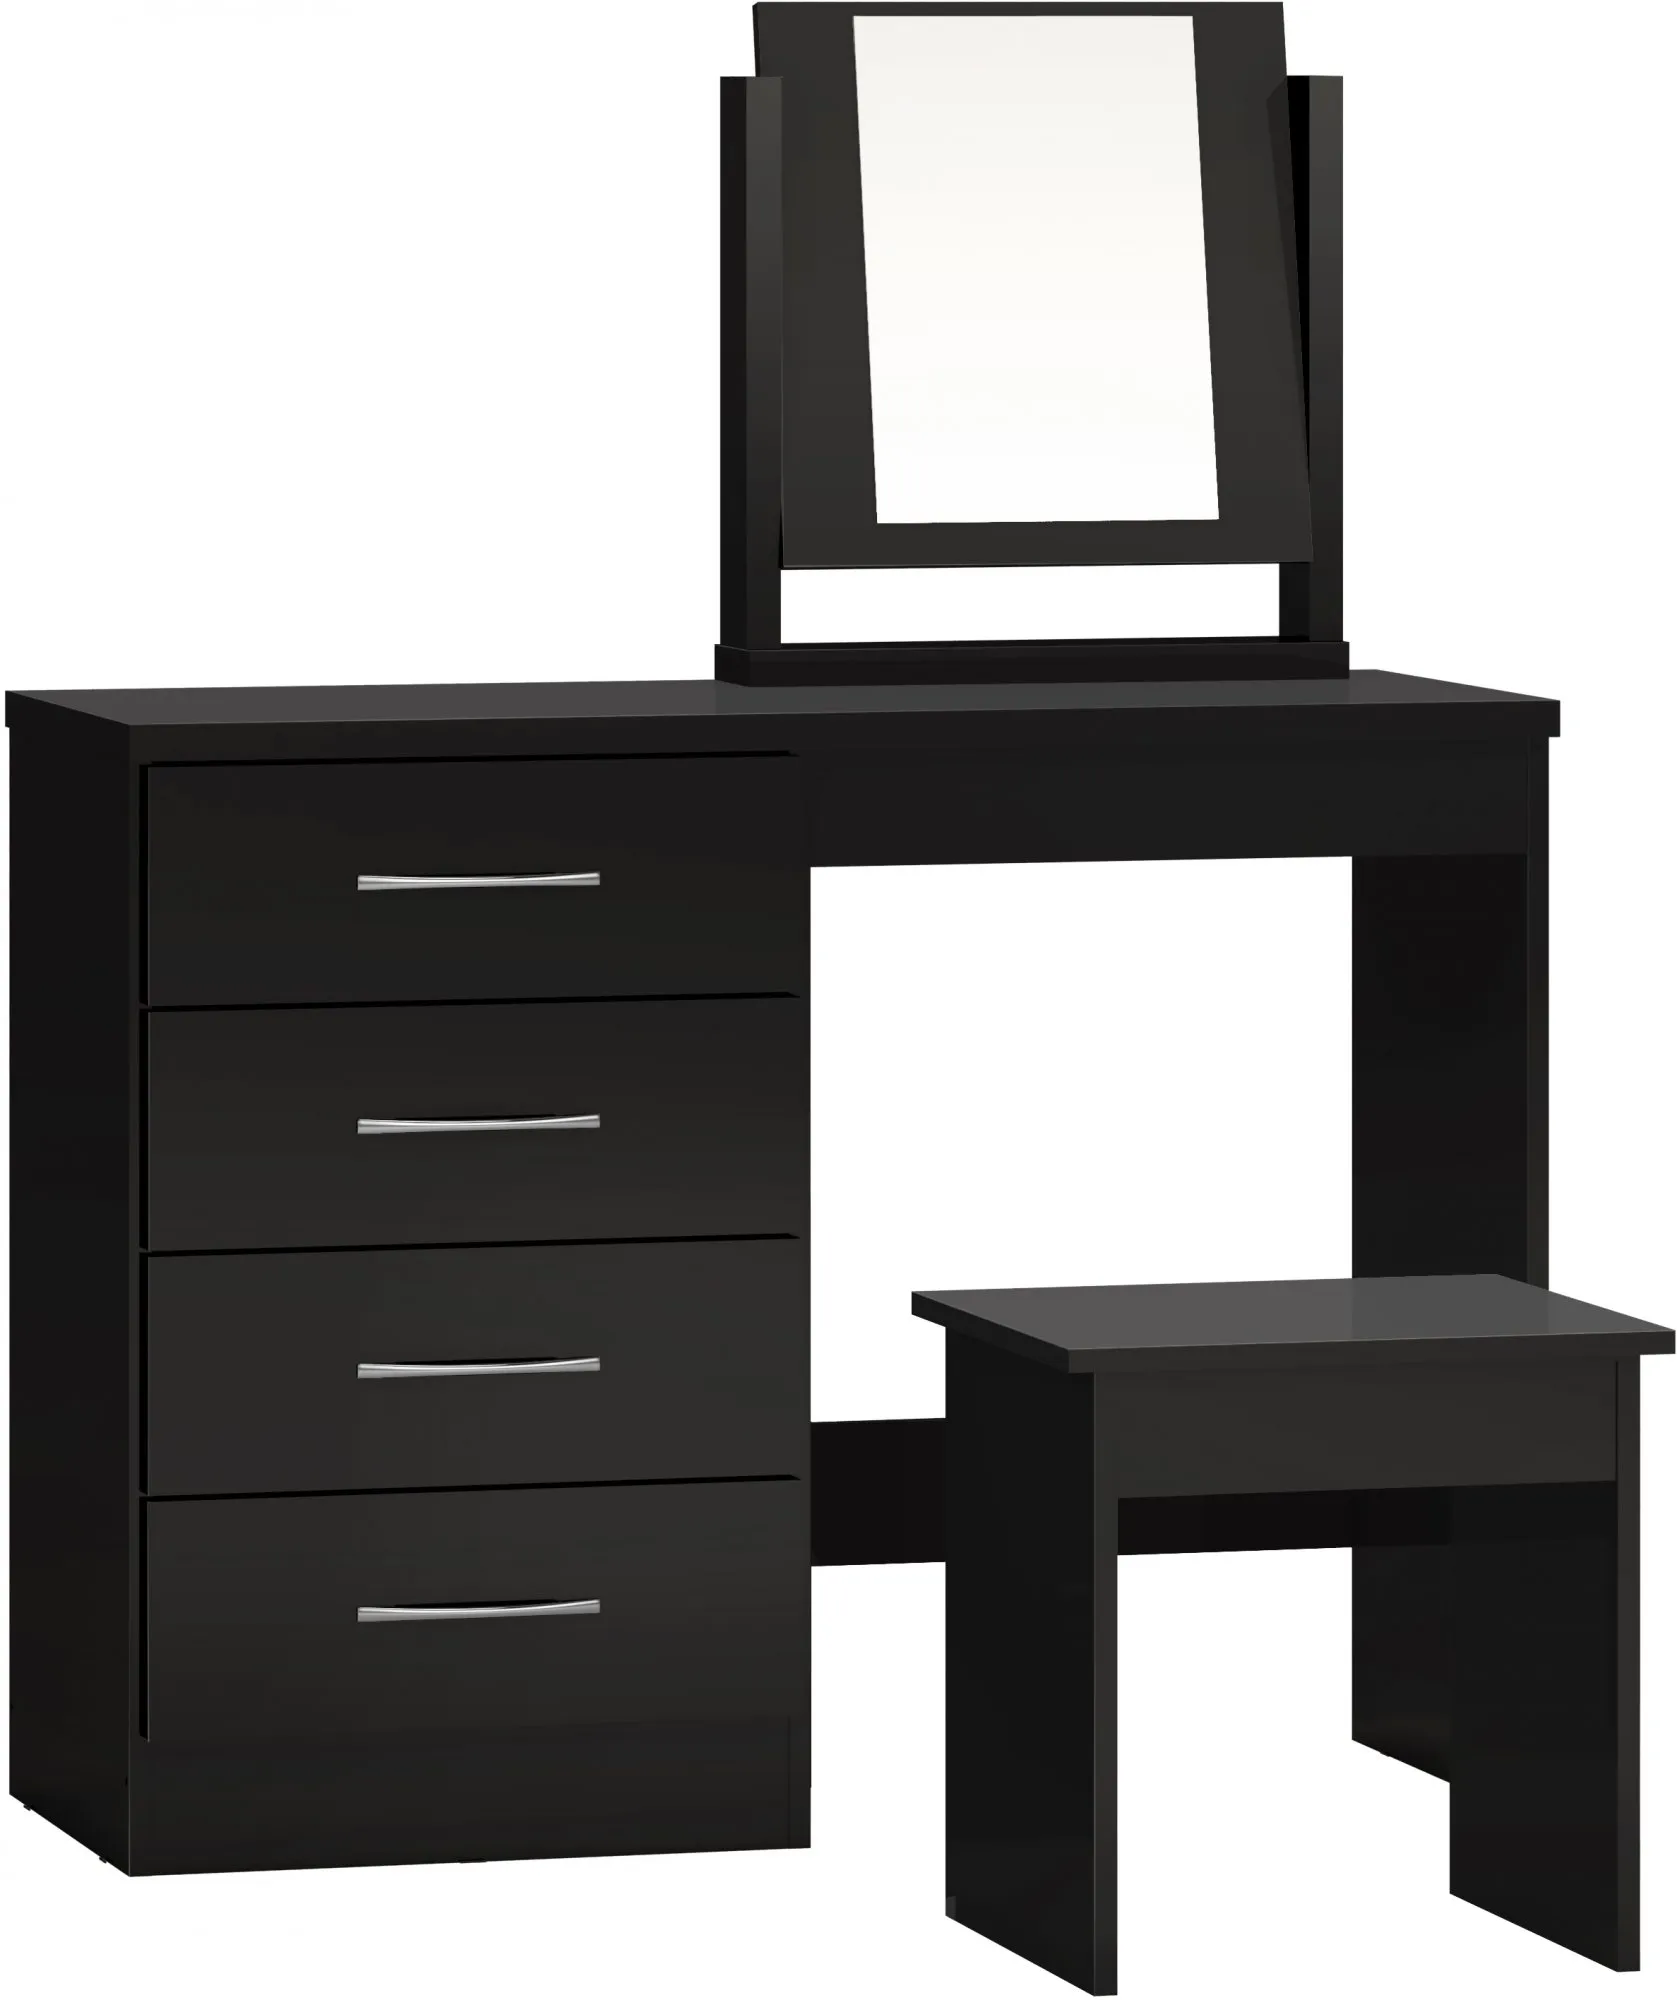 Seconique Seconique Nevada Black High Gloss 4 Drawer Pedestal Dressing Table and Stool